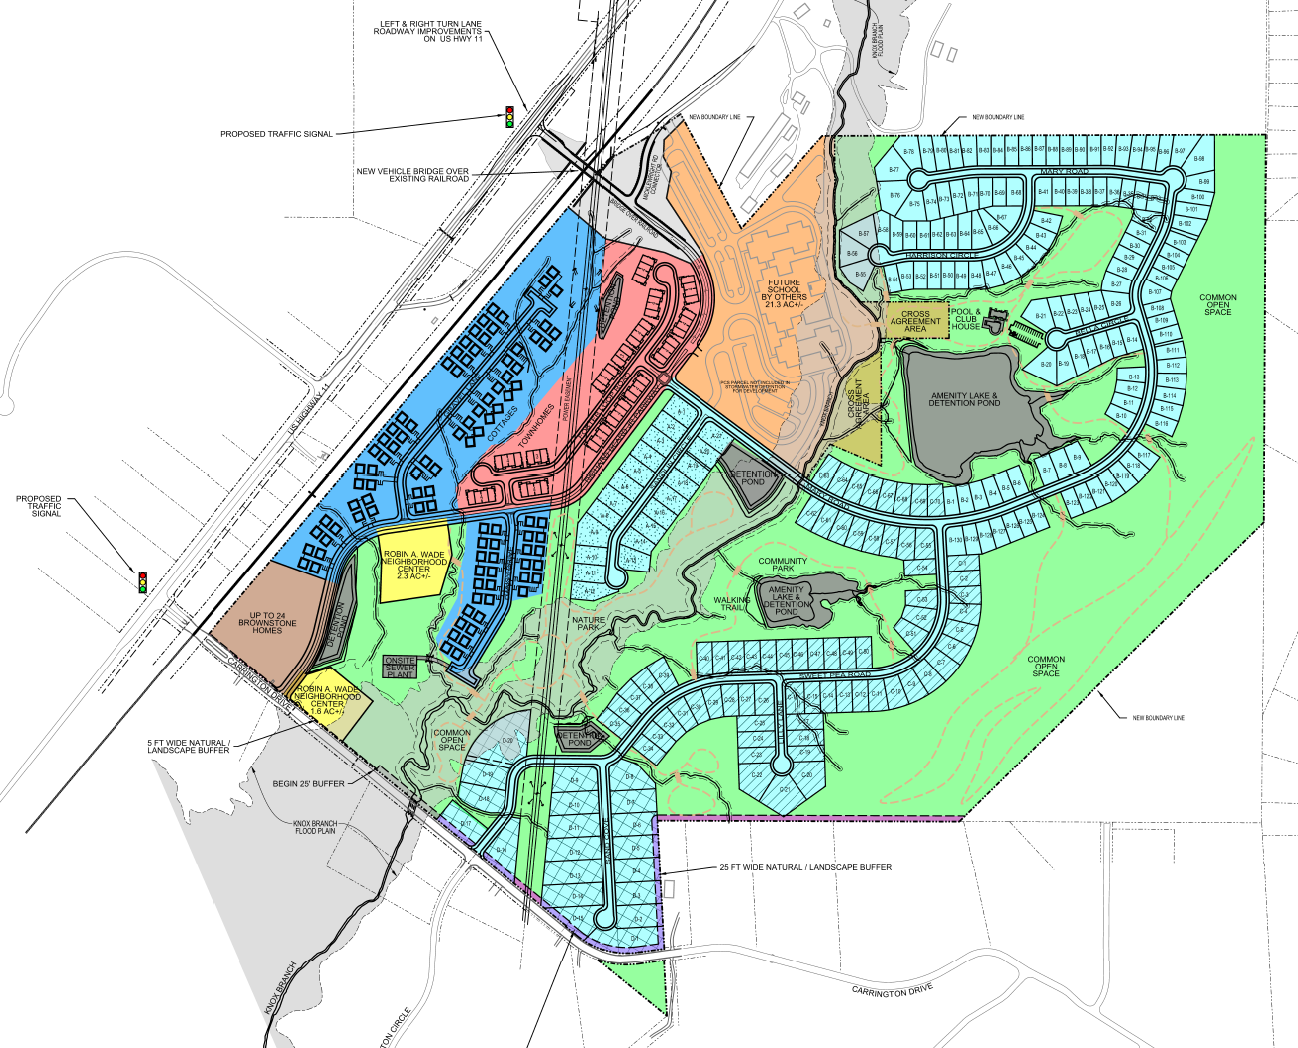 Public hearing tomorrow for proposed Glendale Farms at Carrington development